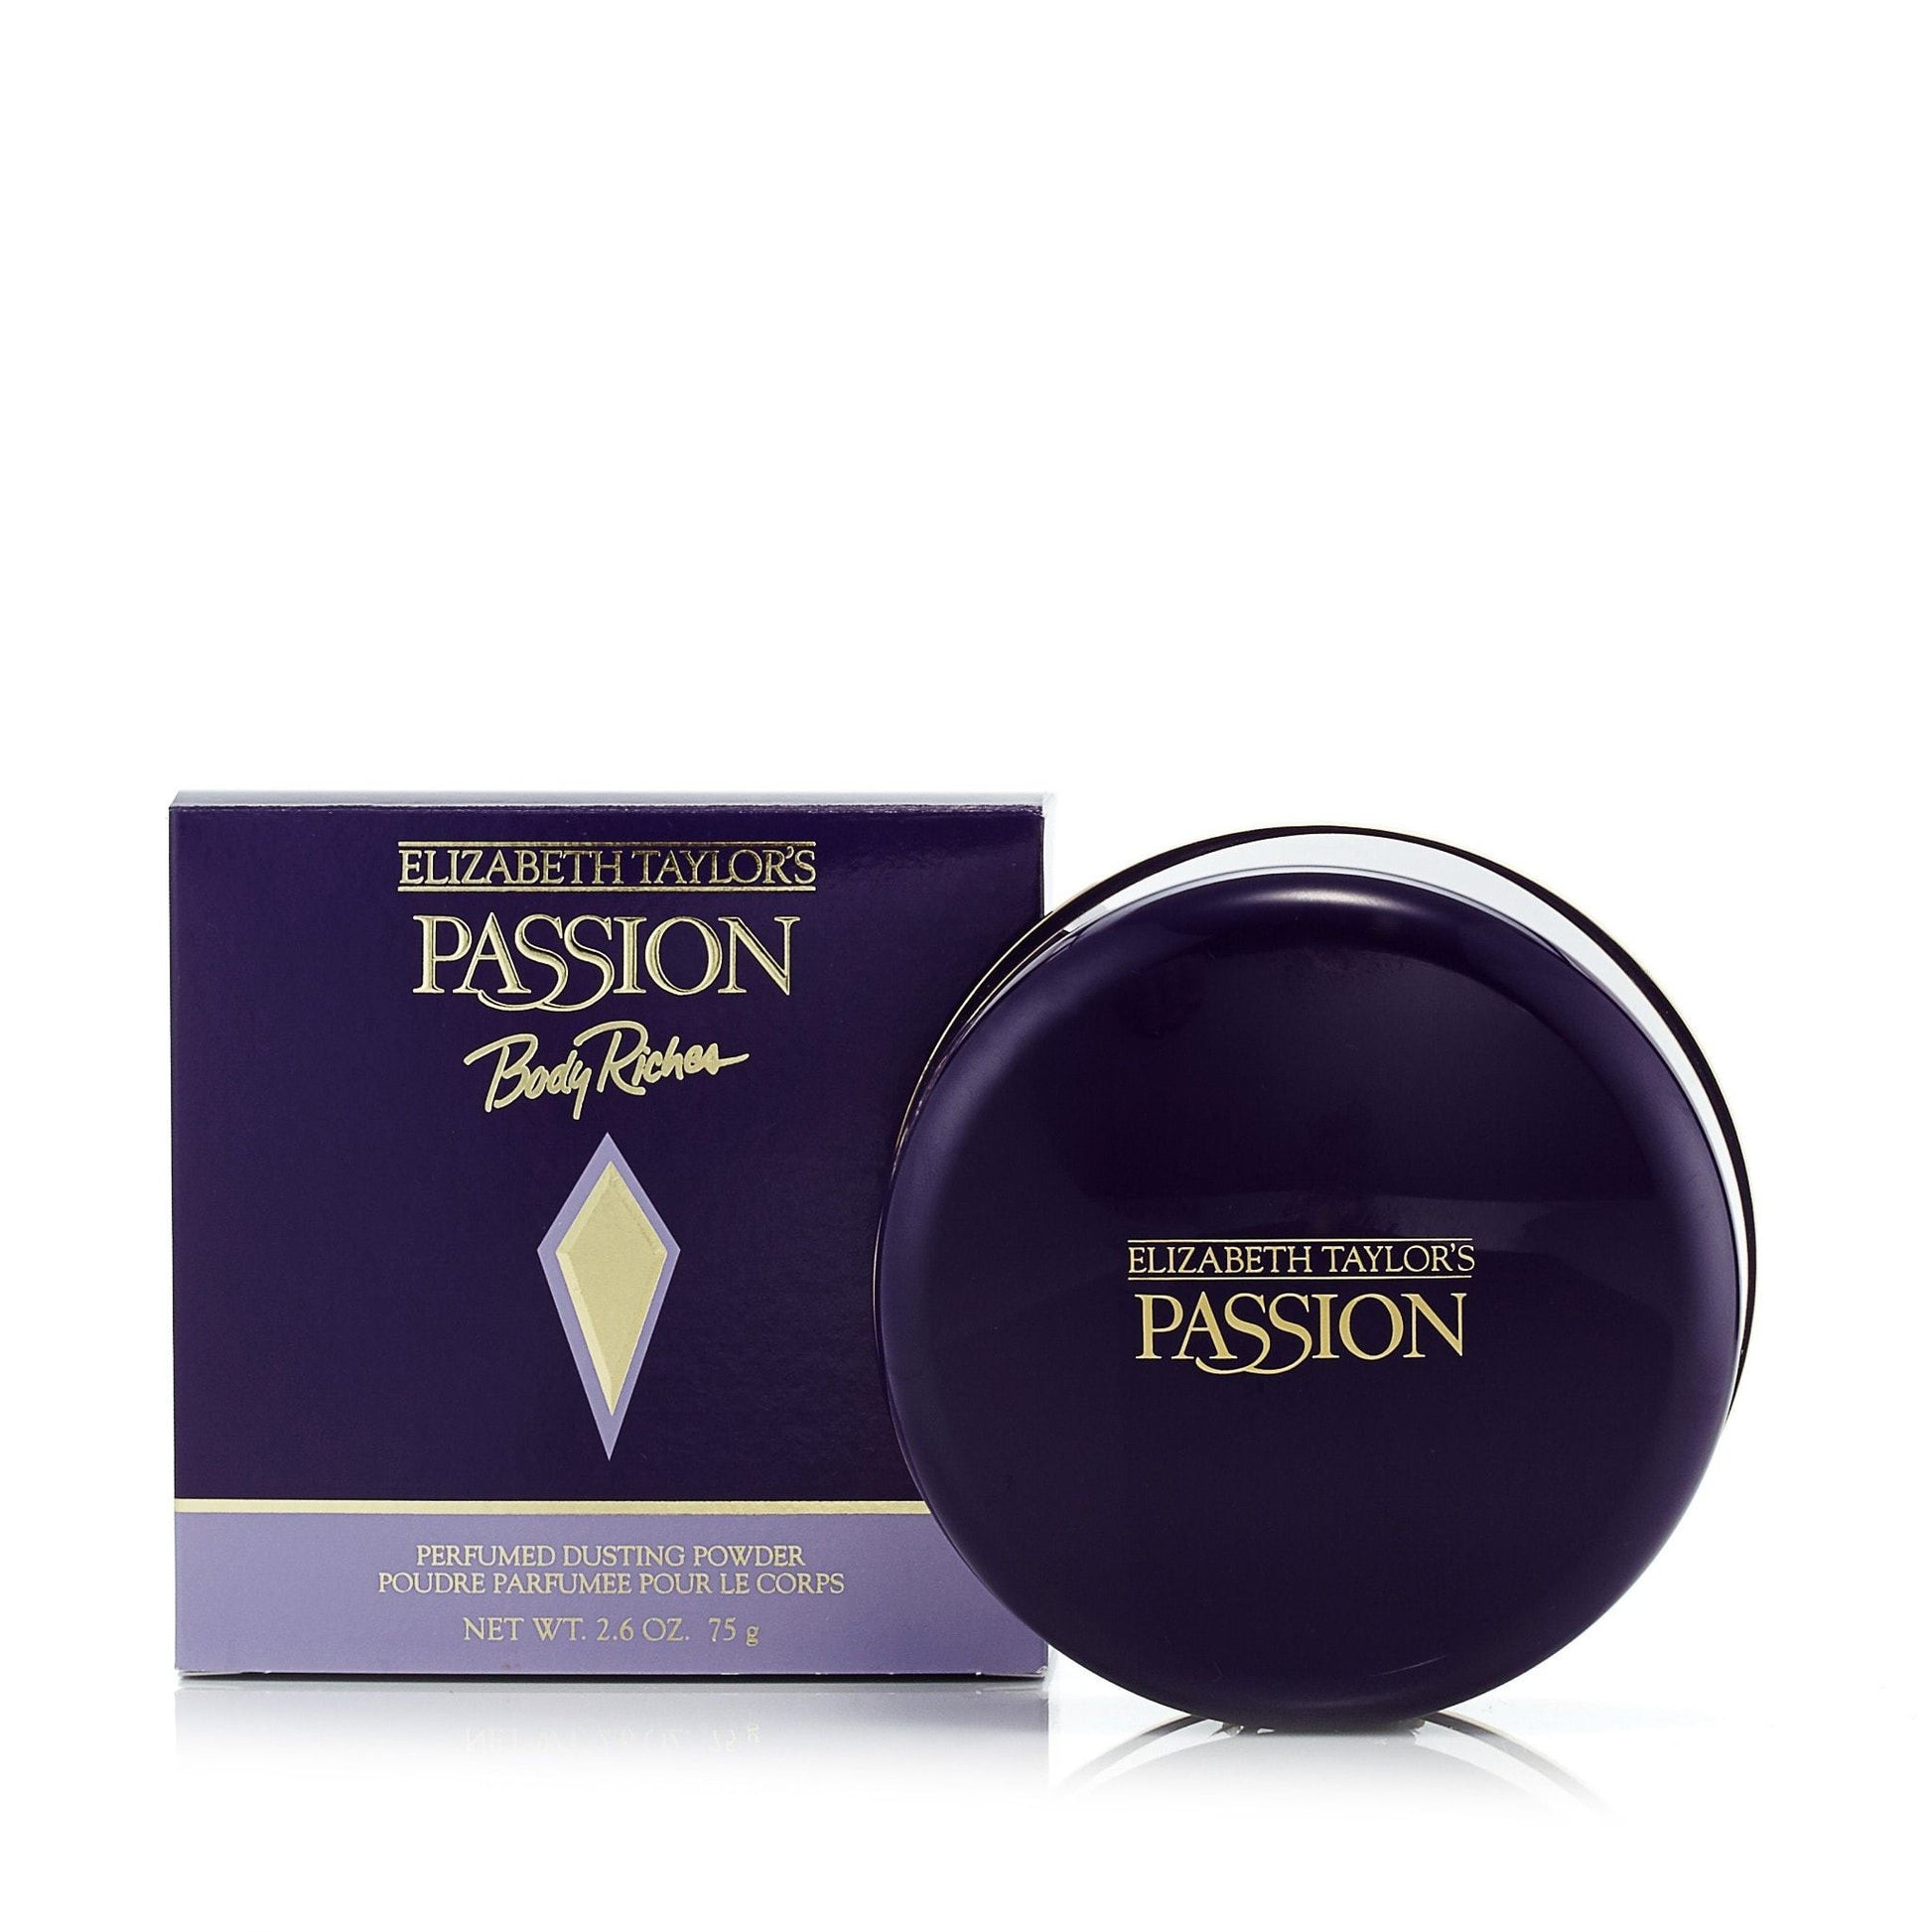 Passion Dusting Powder for Women by Elizabeth Taylor, Product image 1